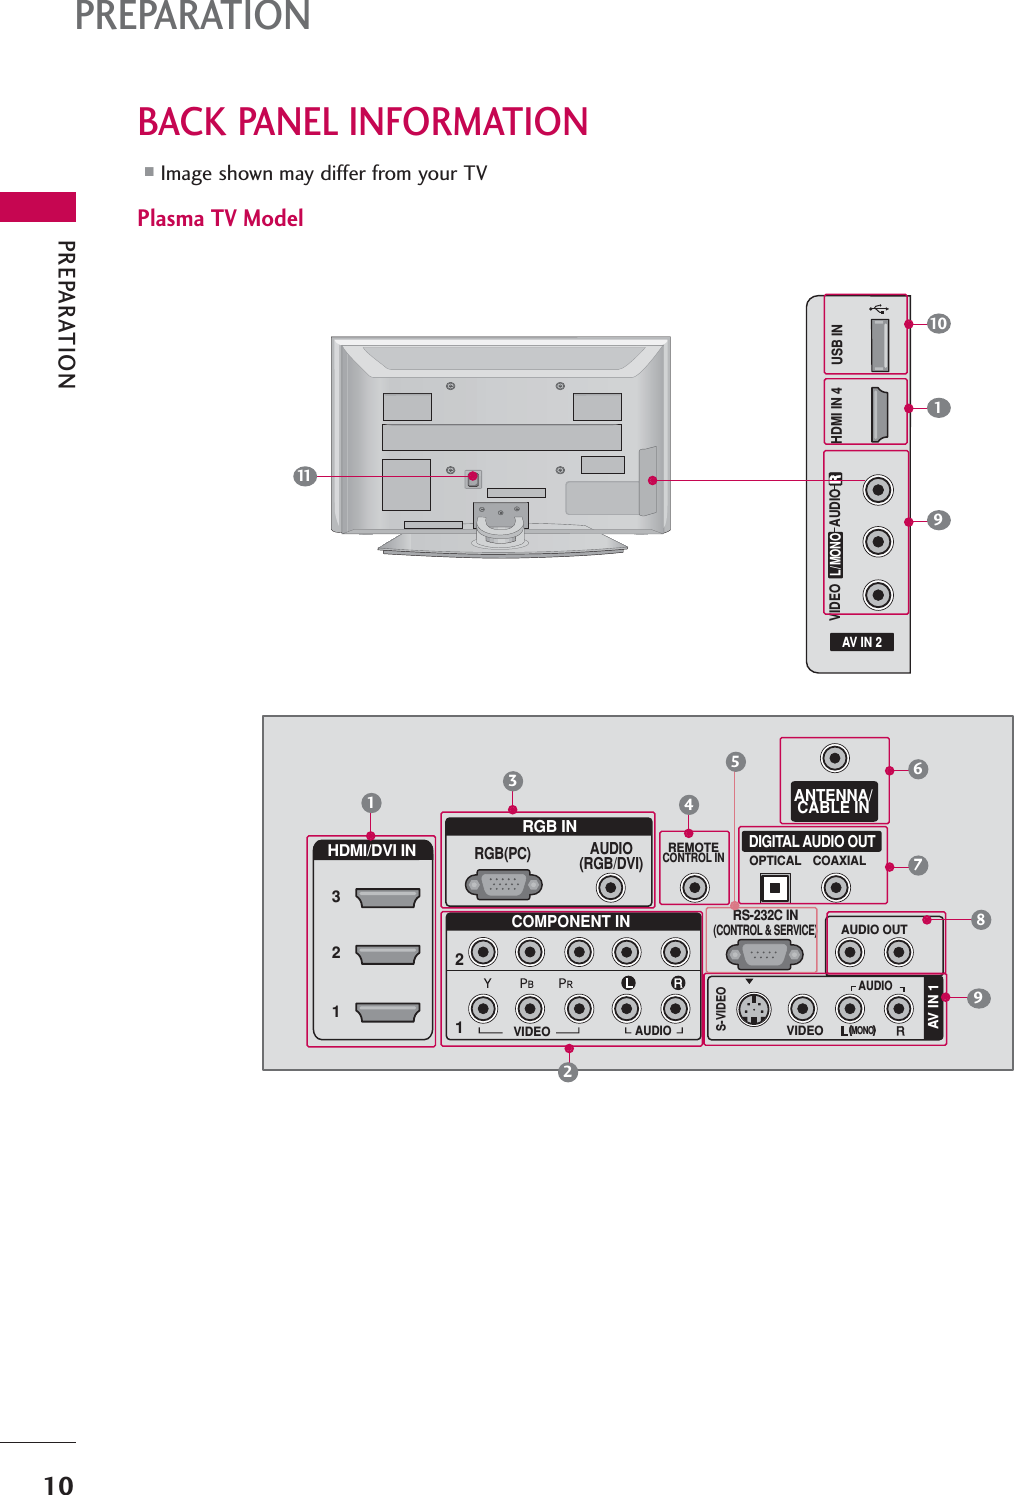 PREPARATION10BACK PANEL INFORMATIONPREPARATIONPlasma TV Model■Image shown may differ from your TVAV IN 2L/MONORAUDIOVIDEOUSB INHDMI IN 4RGB INCOMPONENT INAUDIO(RGB/DVI)RGB(PC)ANTENNA/CABLE IN12RS-232C IN(CONTROL &amp; SERVICE)VIDEOAUDIOVIDEOAUDIO OUTOPTICAL COAXIALMONO( )AUDIOS-VIDEODIGITAL AUDIO OUTAV IN 1HDMI/DVI IN 321REMOTECONTROL IN134678211995101